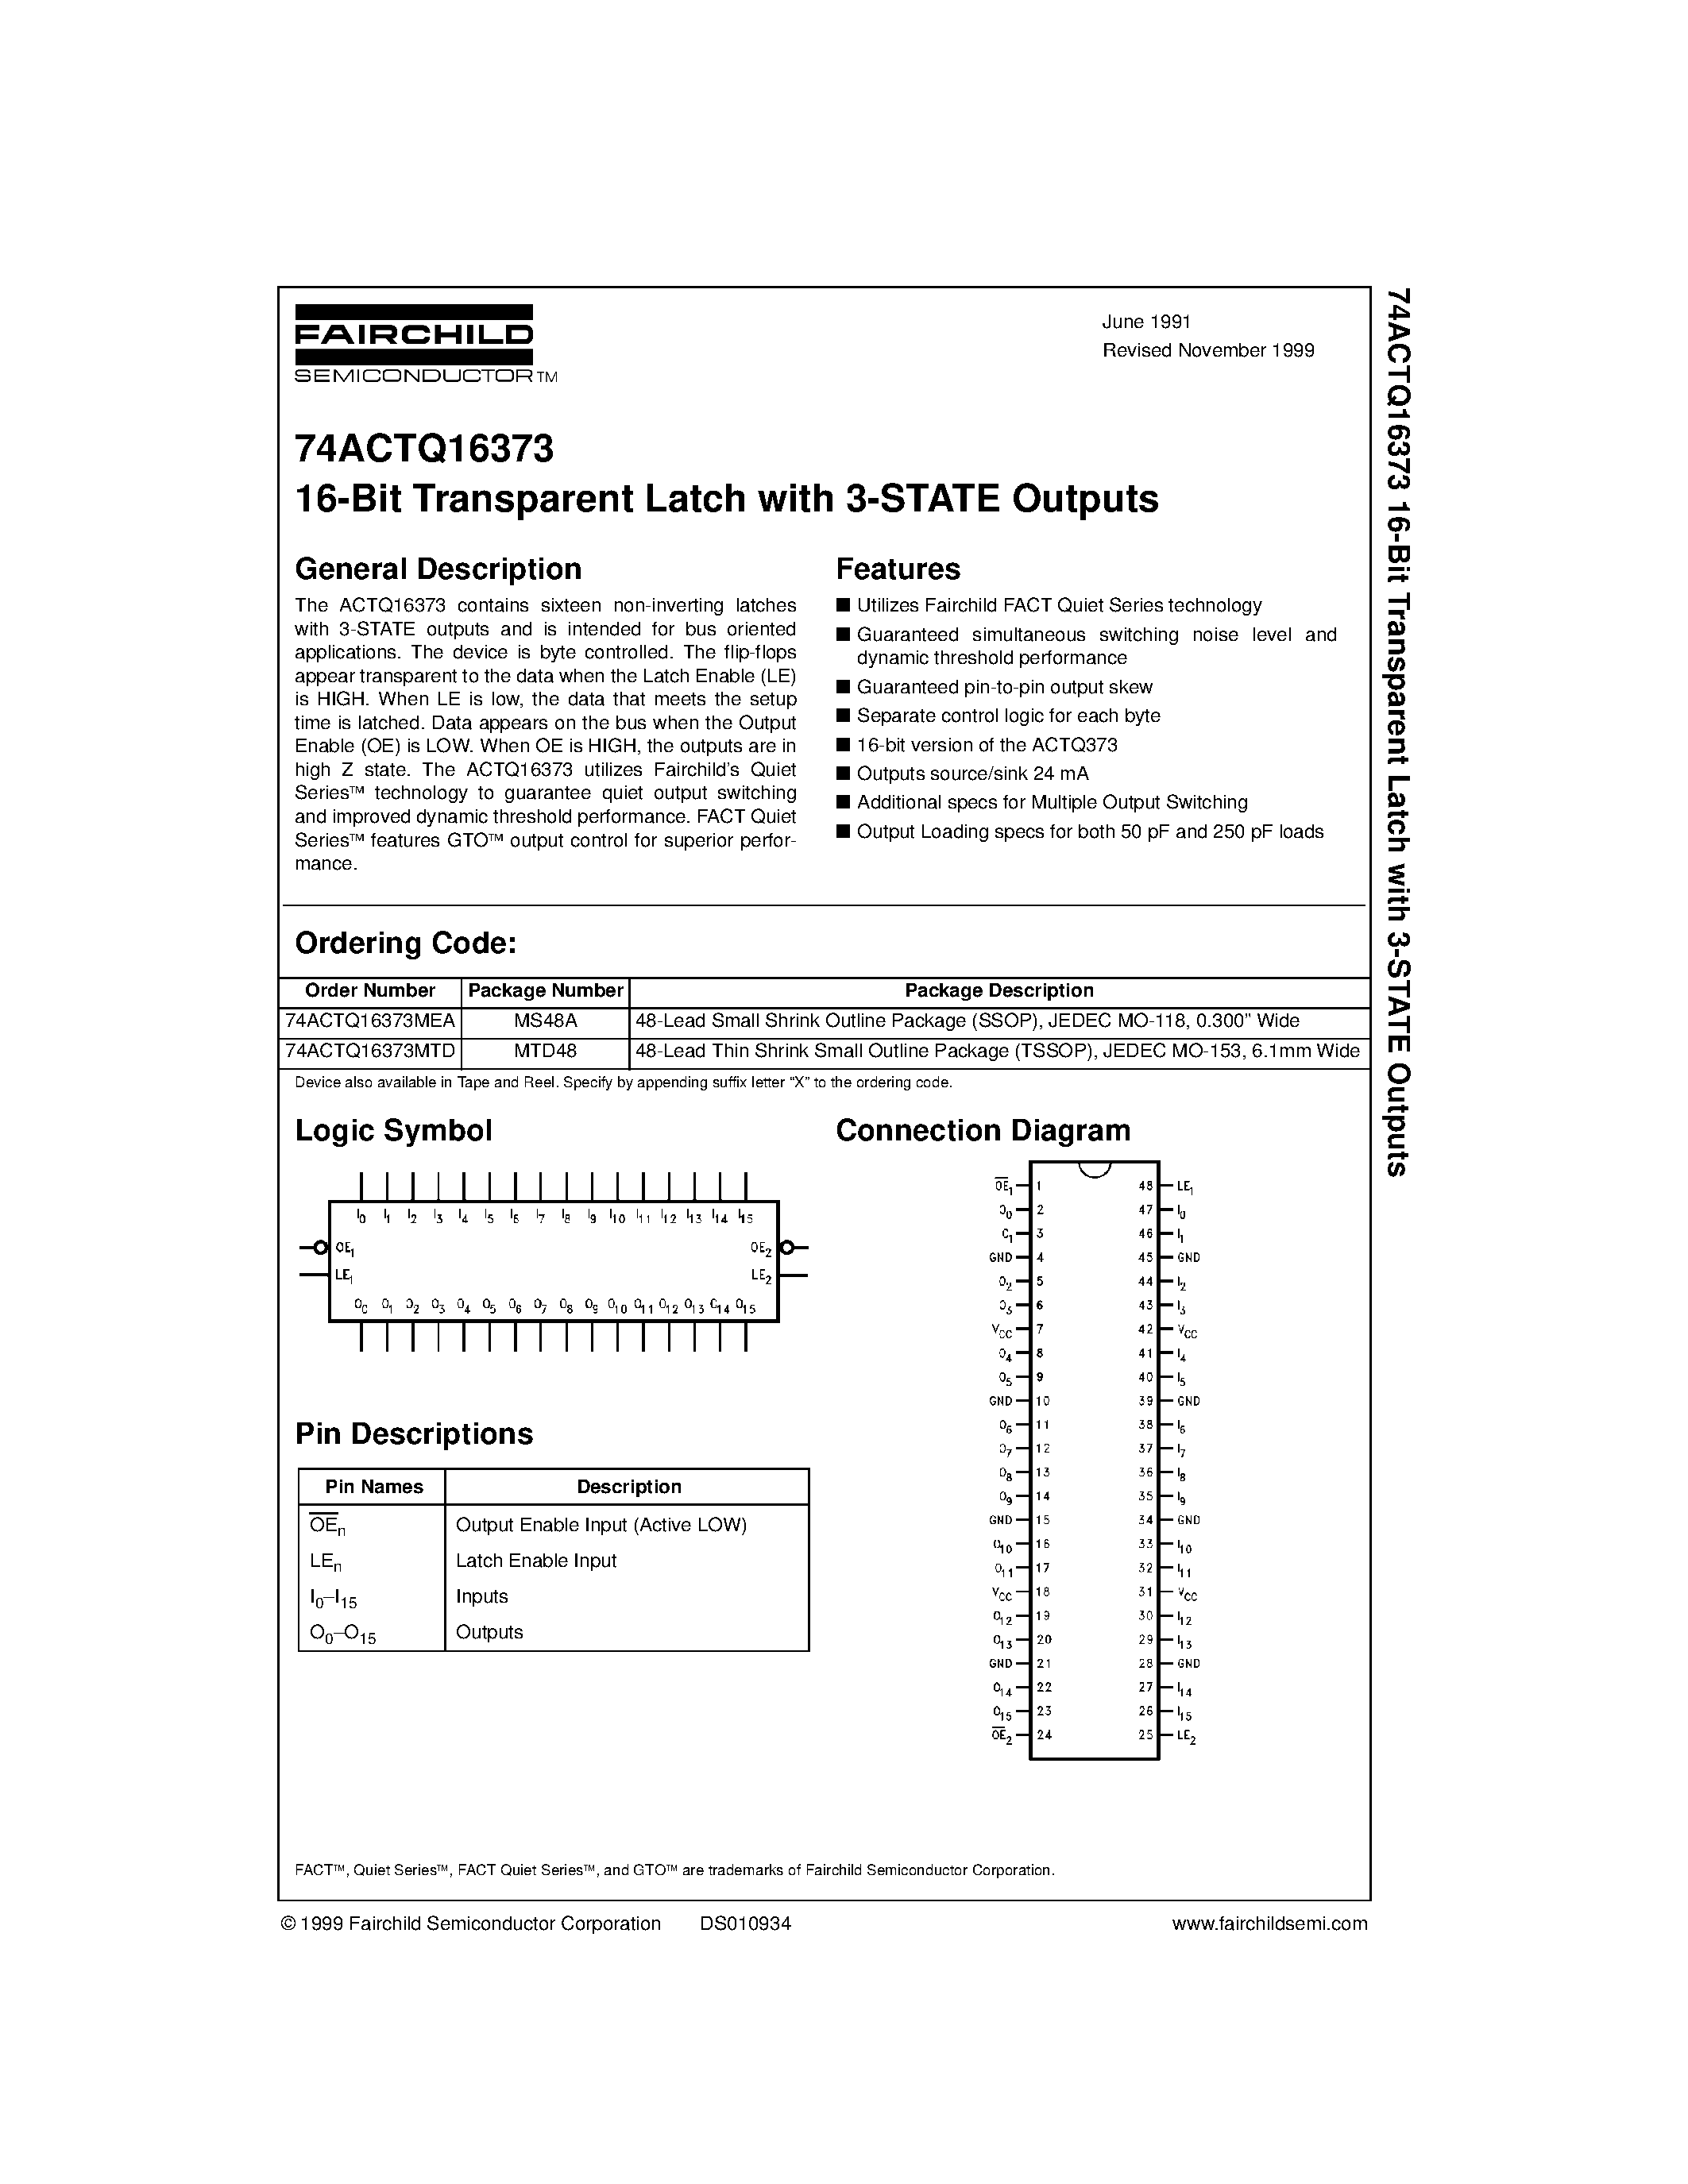 Datasheet 74ACTQ16373 - 16-Bit Transparent Latch with 3-STATE Outputs page 1